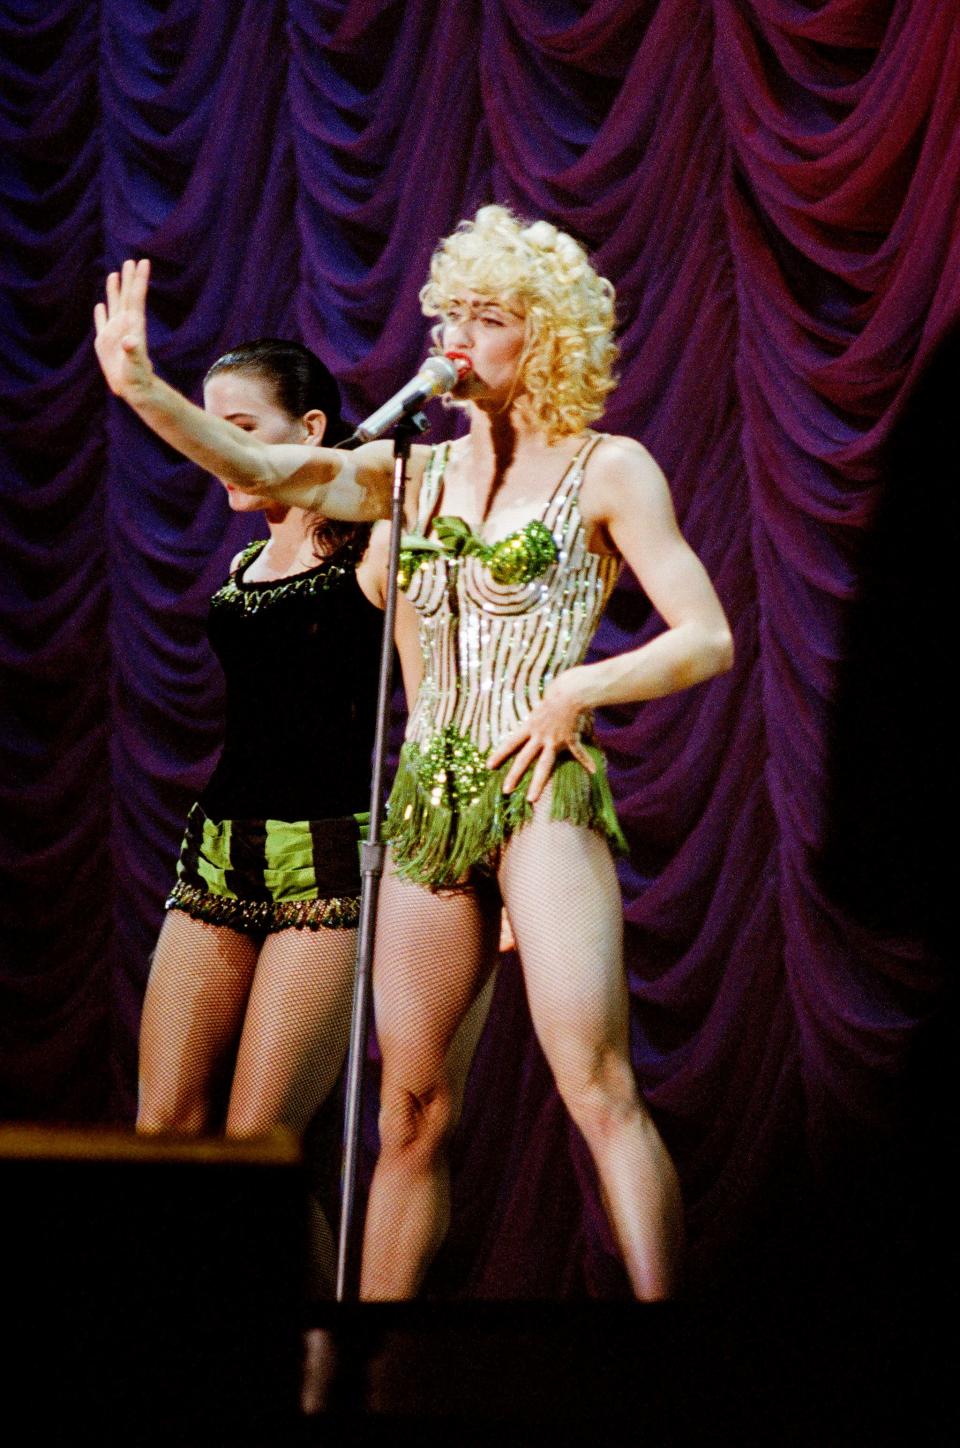 Madonna performing on stage at Wembley Stadium 1990 during her Blonde Ambition tour.